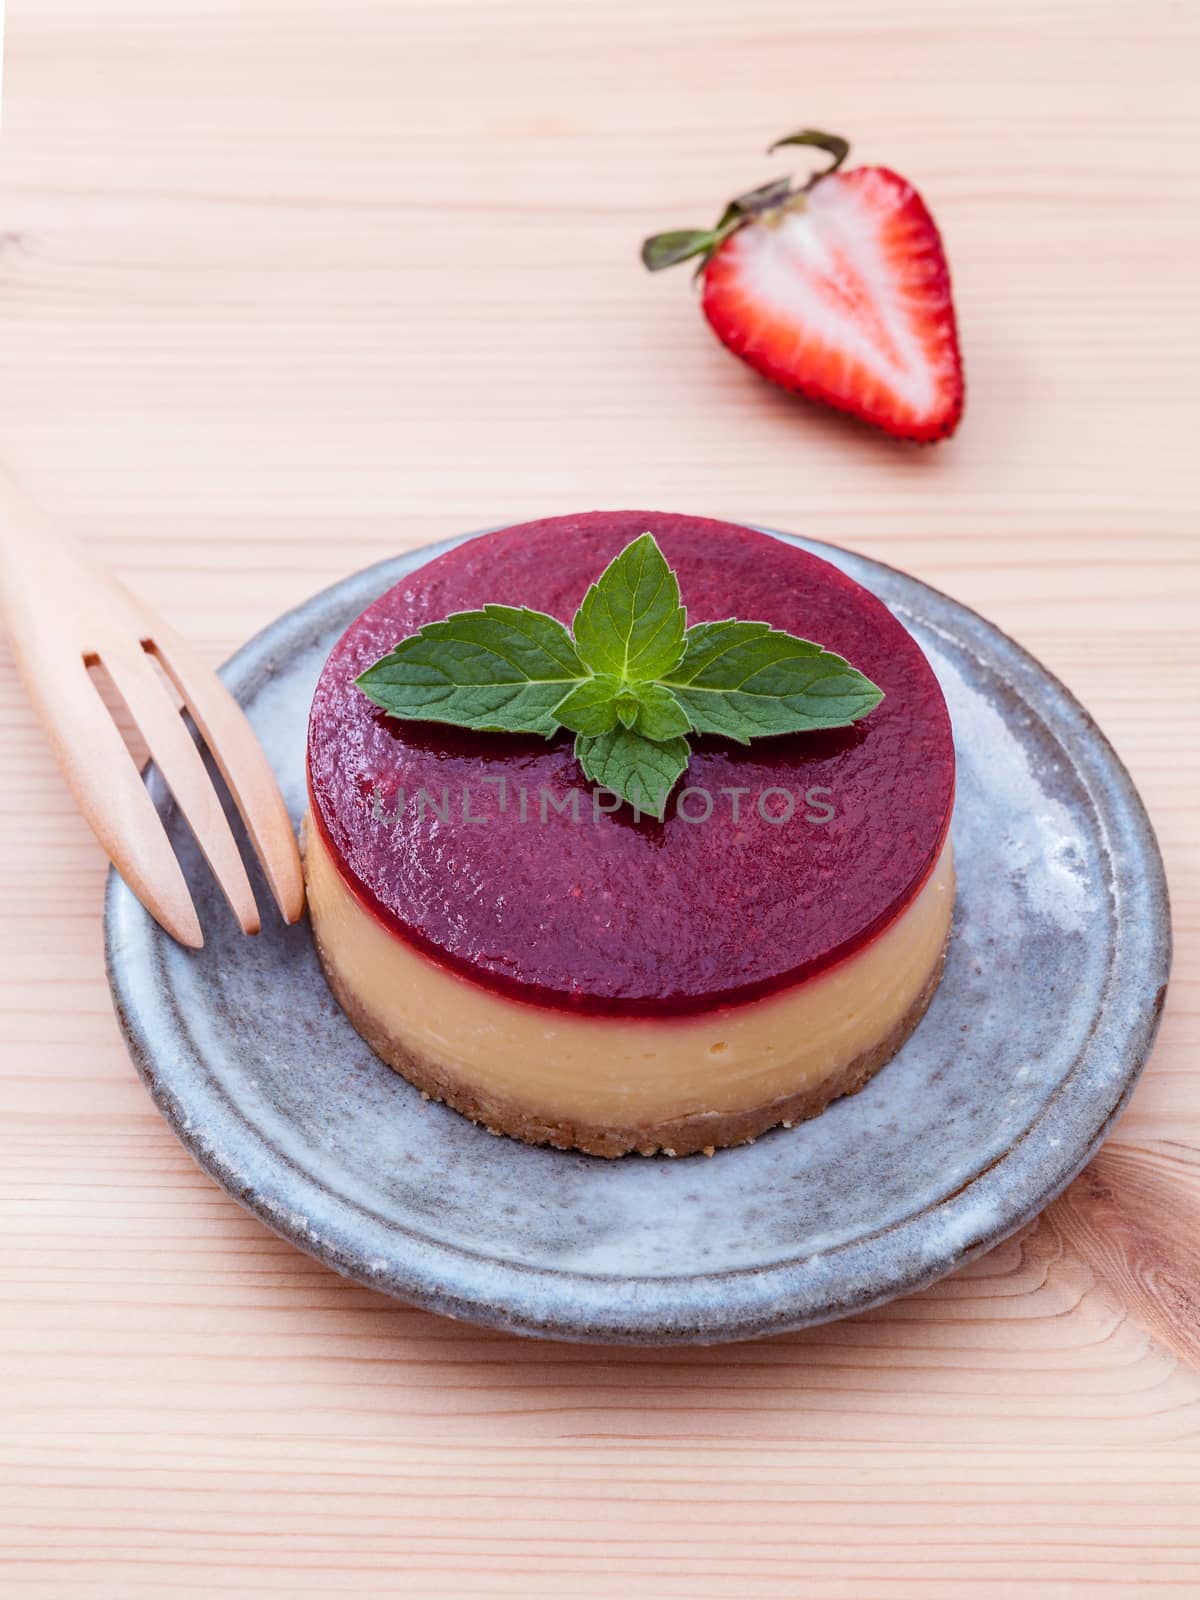 Strawberry cheesecake with fresh mint leaves on wooden backgroun by kerdkanno